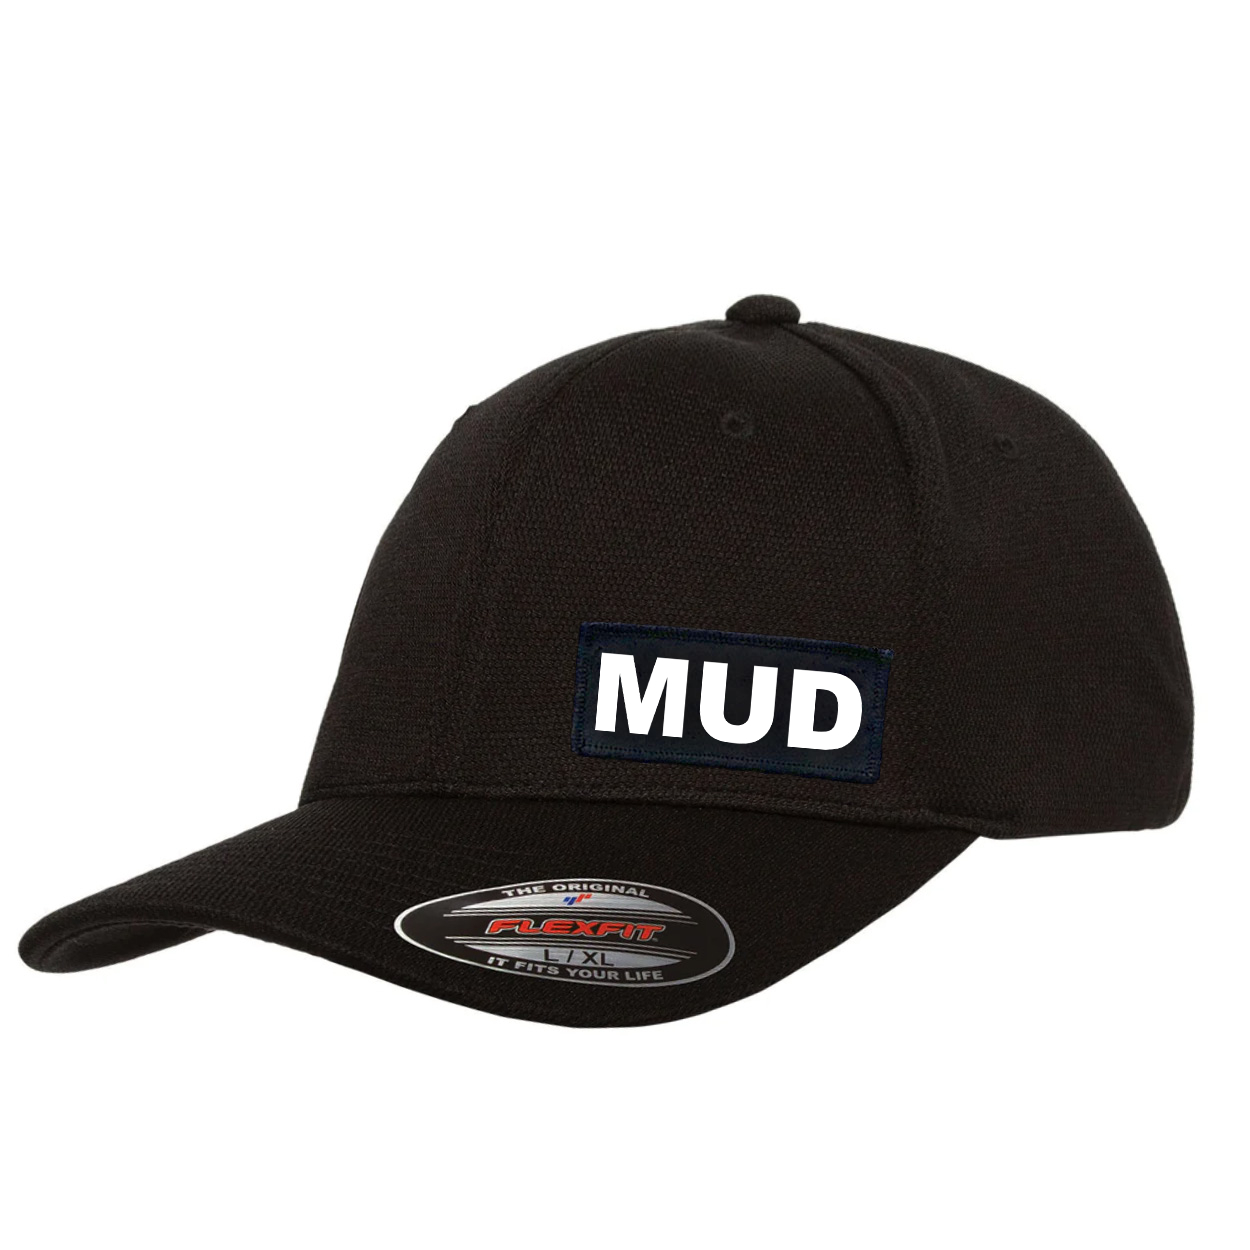 Mud Brand Logo Night Out Woven Patch Flex-Fit Hat Black 